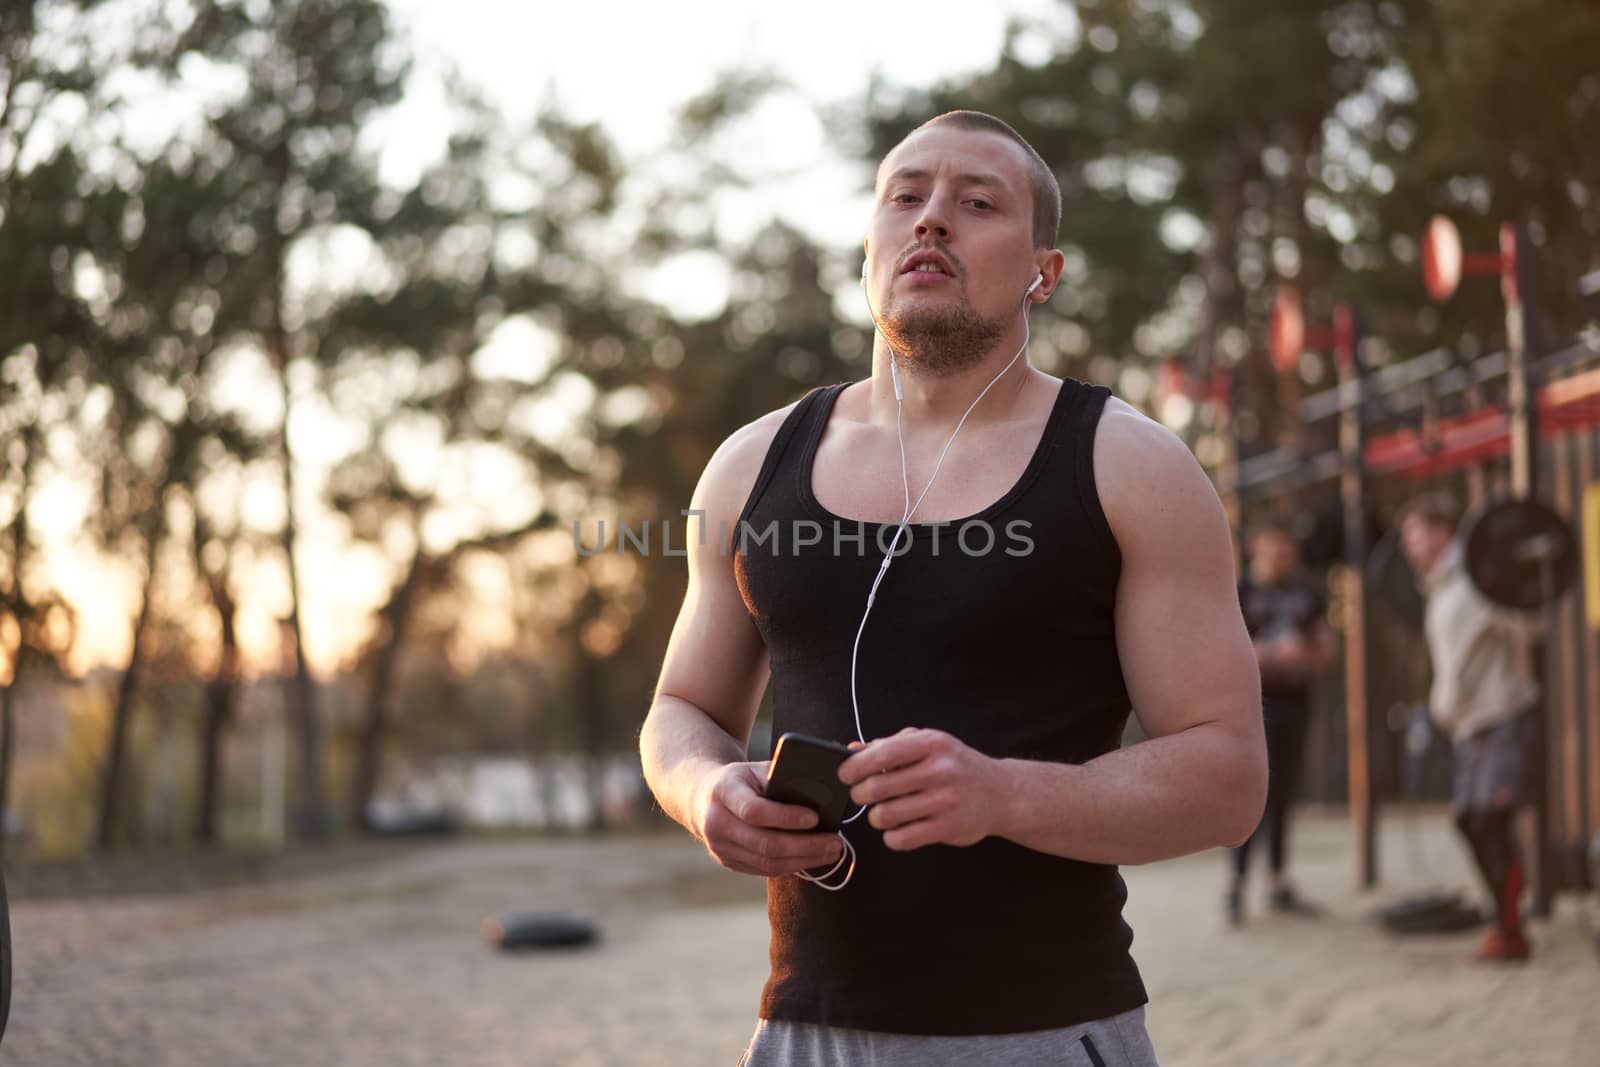 Young adult caucasian athlete listening phone music white headphones after workout. Handsome sportsman resting after cross training exercises sunset background. Healthy lifestyle concept.